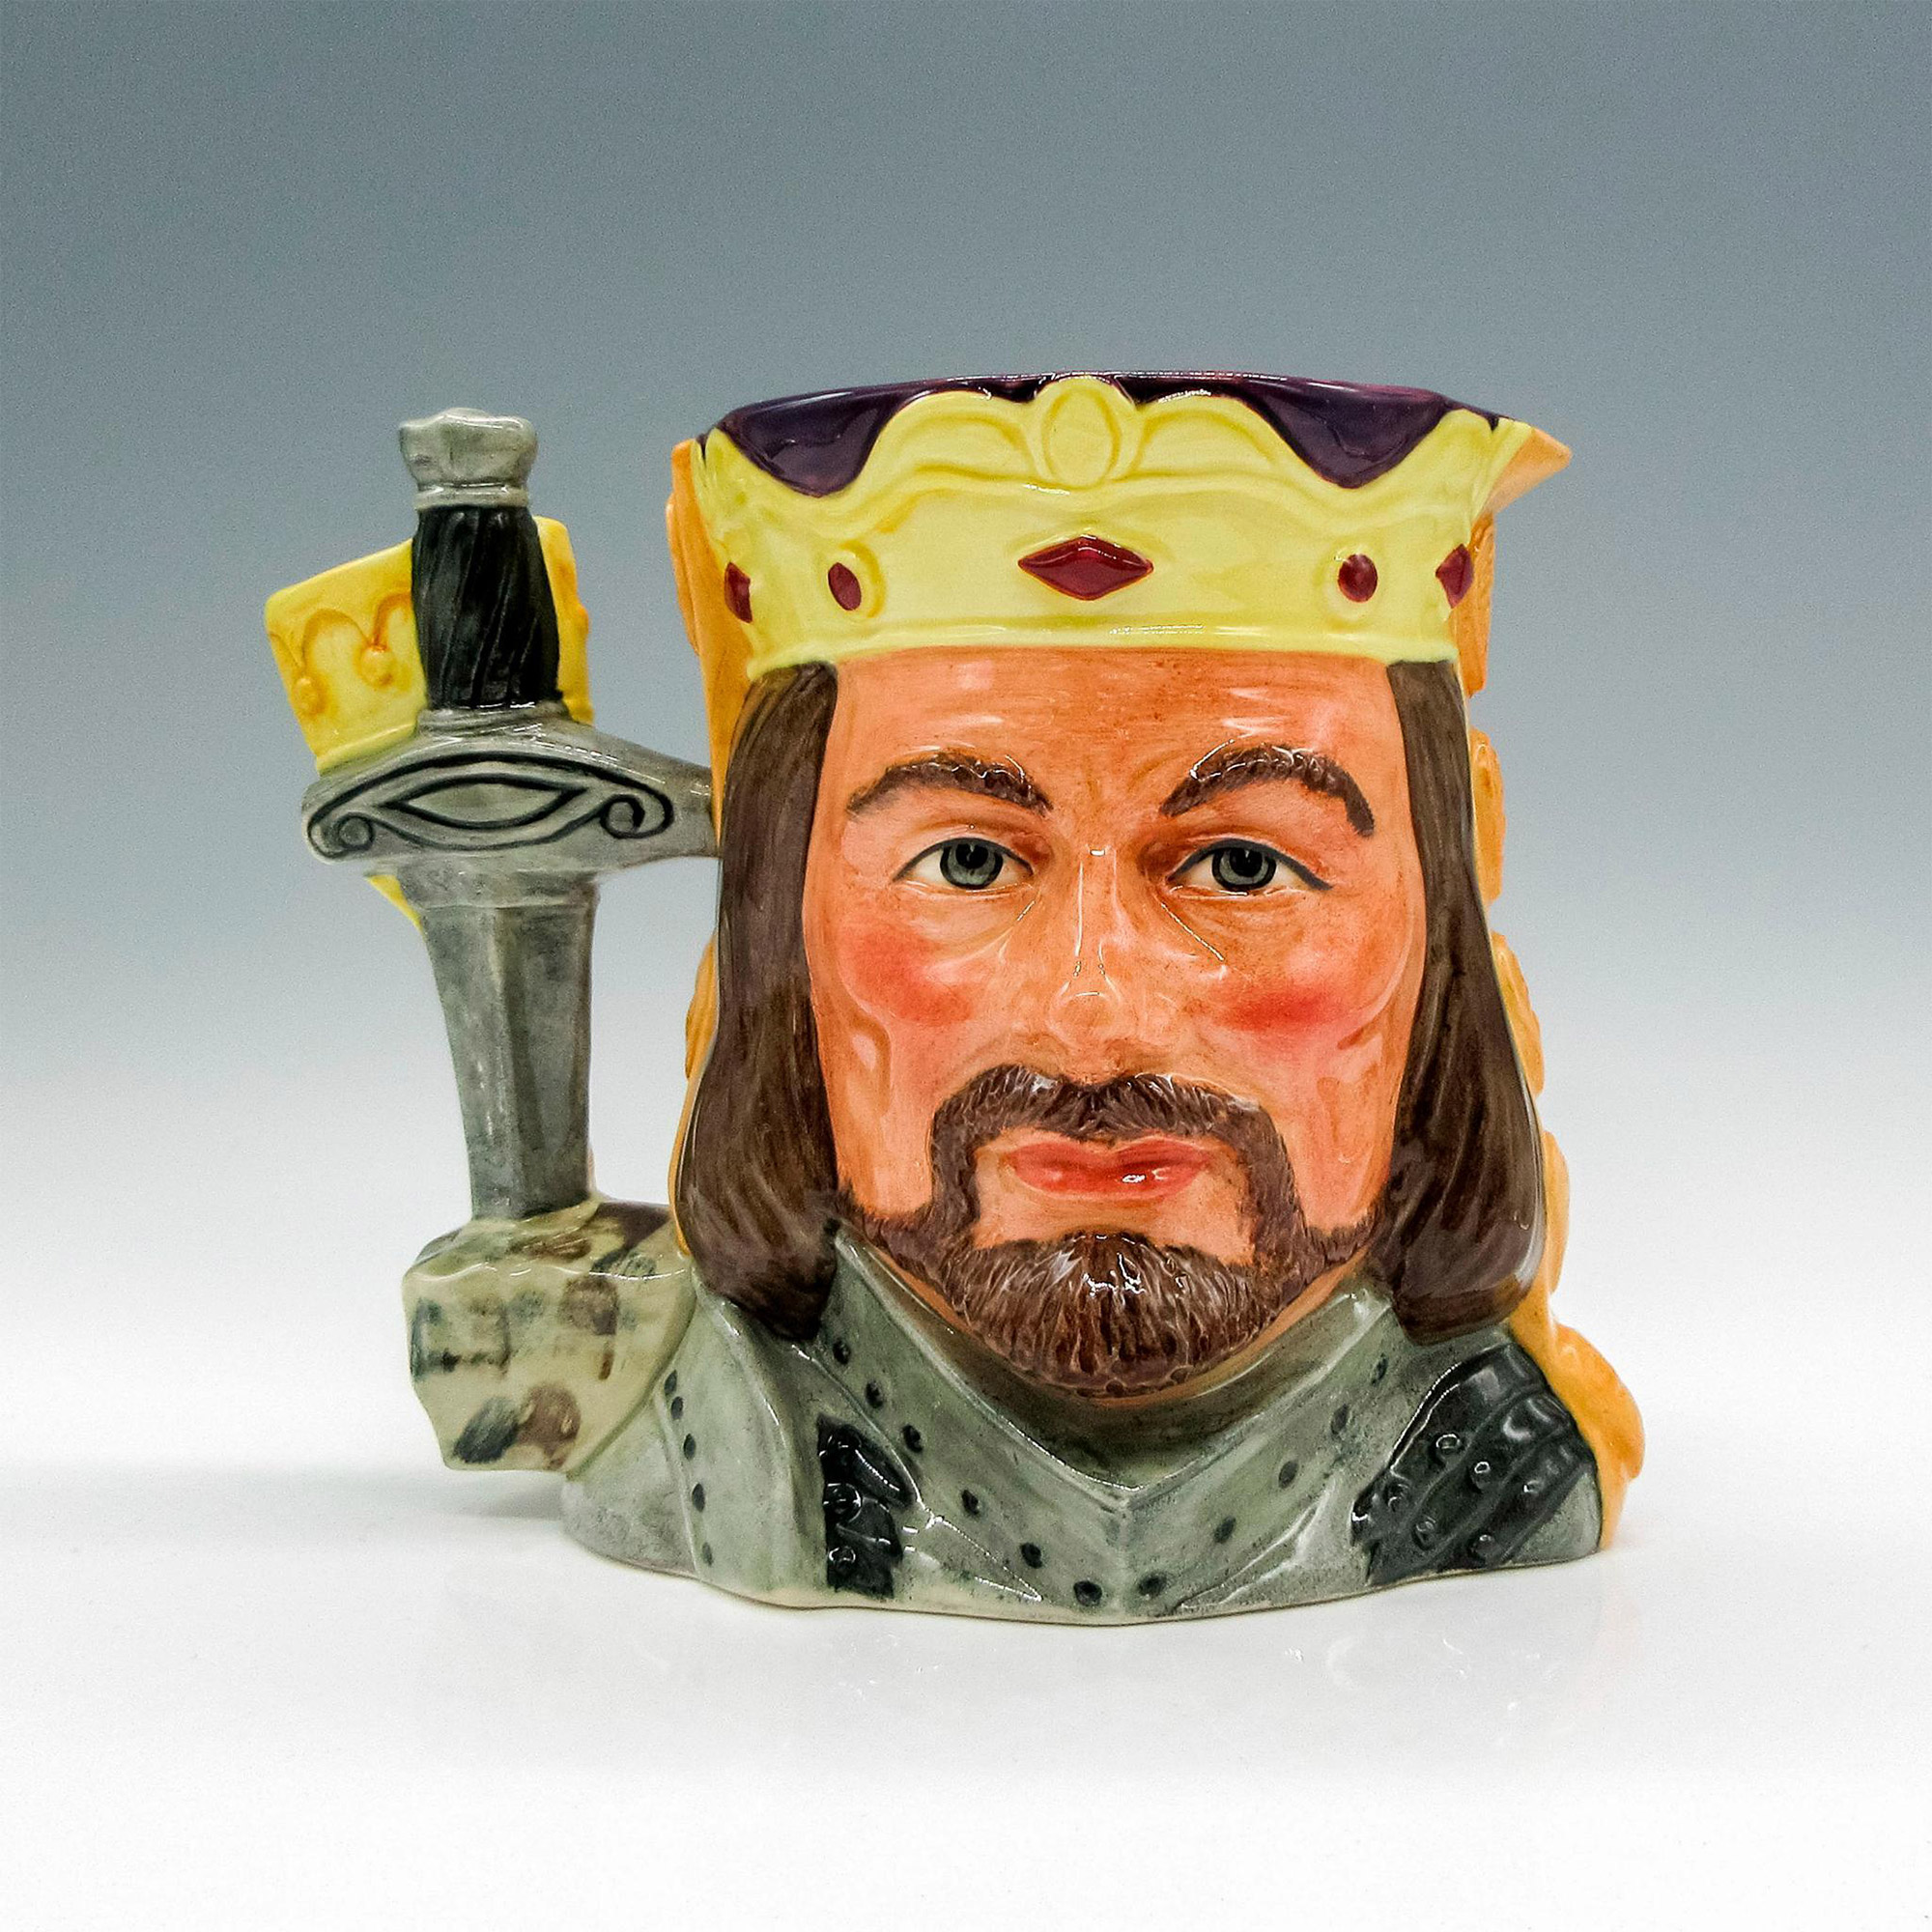 King Arthur and Guinevere D6836 - Large - Royal Doulton Character Jug - Image 2 of 5